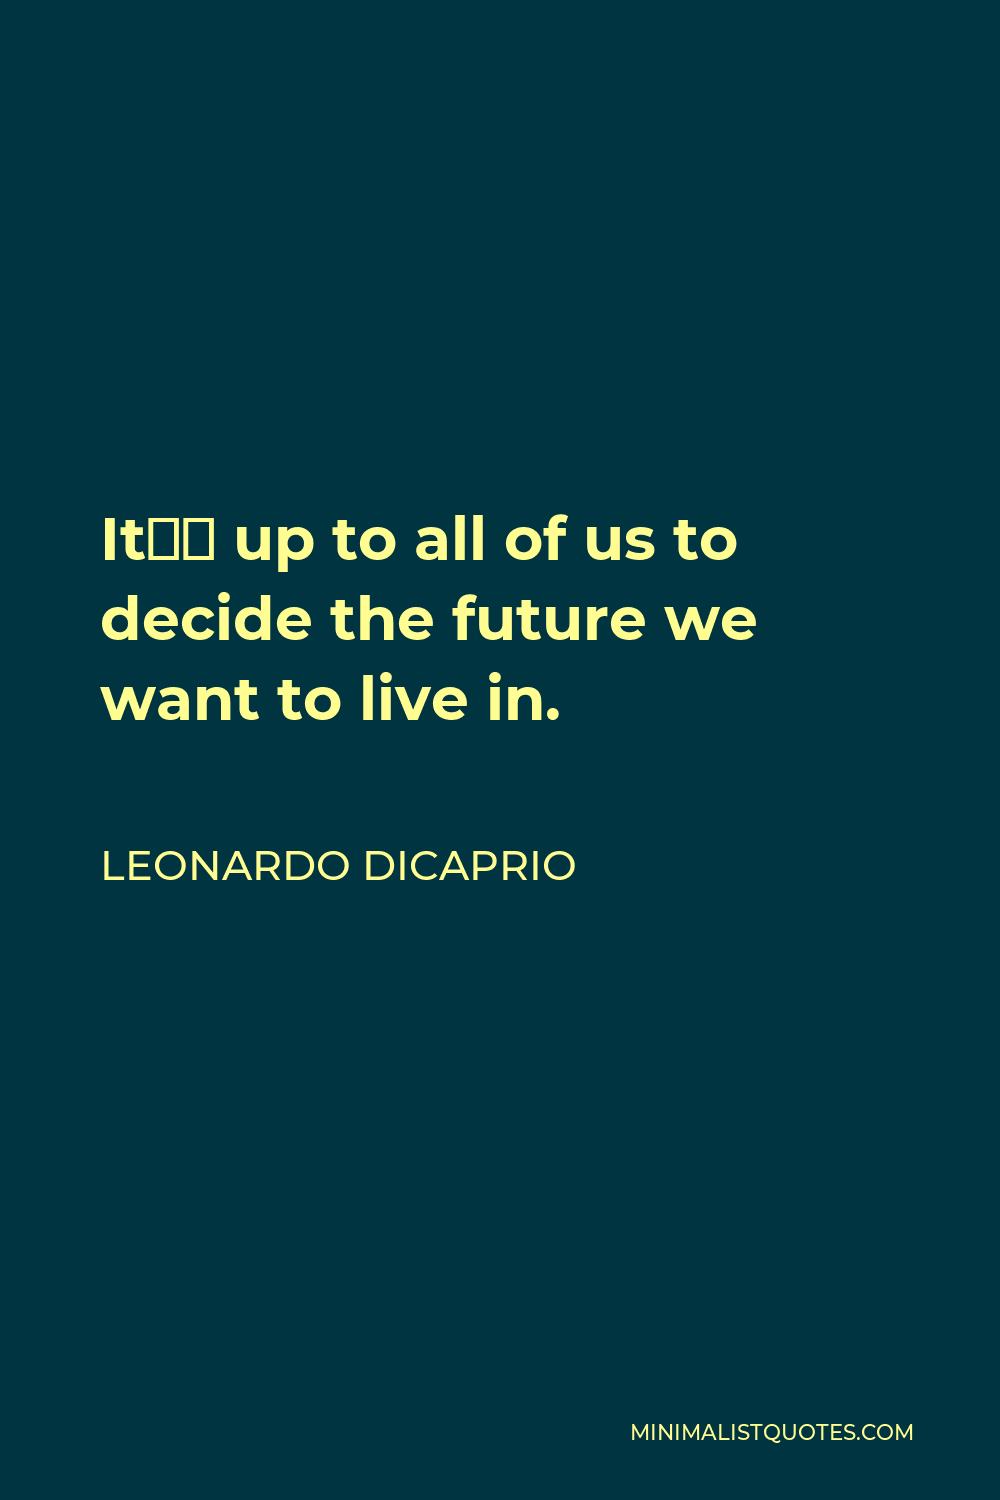 Leonardo DiCaprio Quote - It’s up to all of us to decide the future we want to live in.